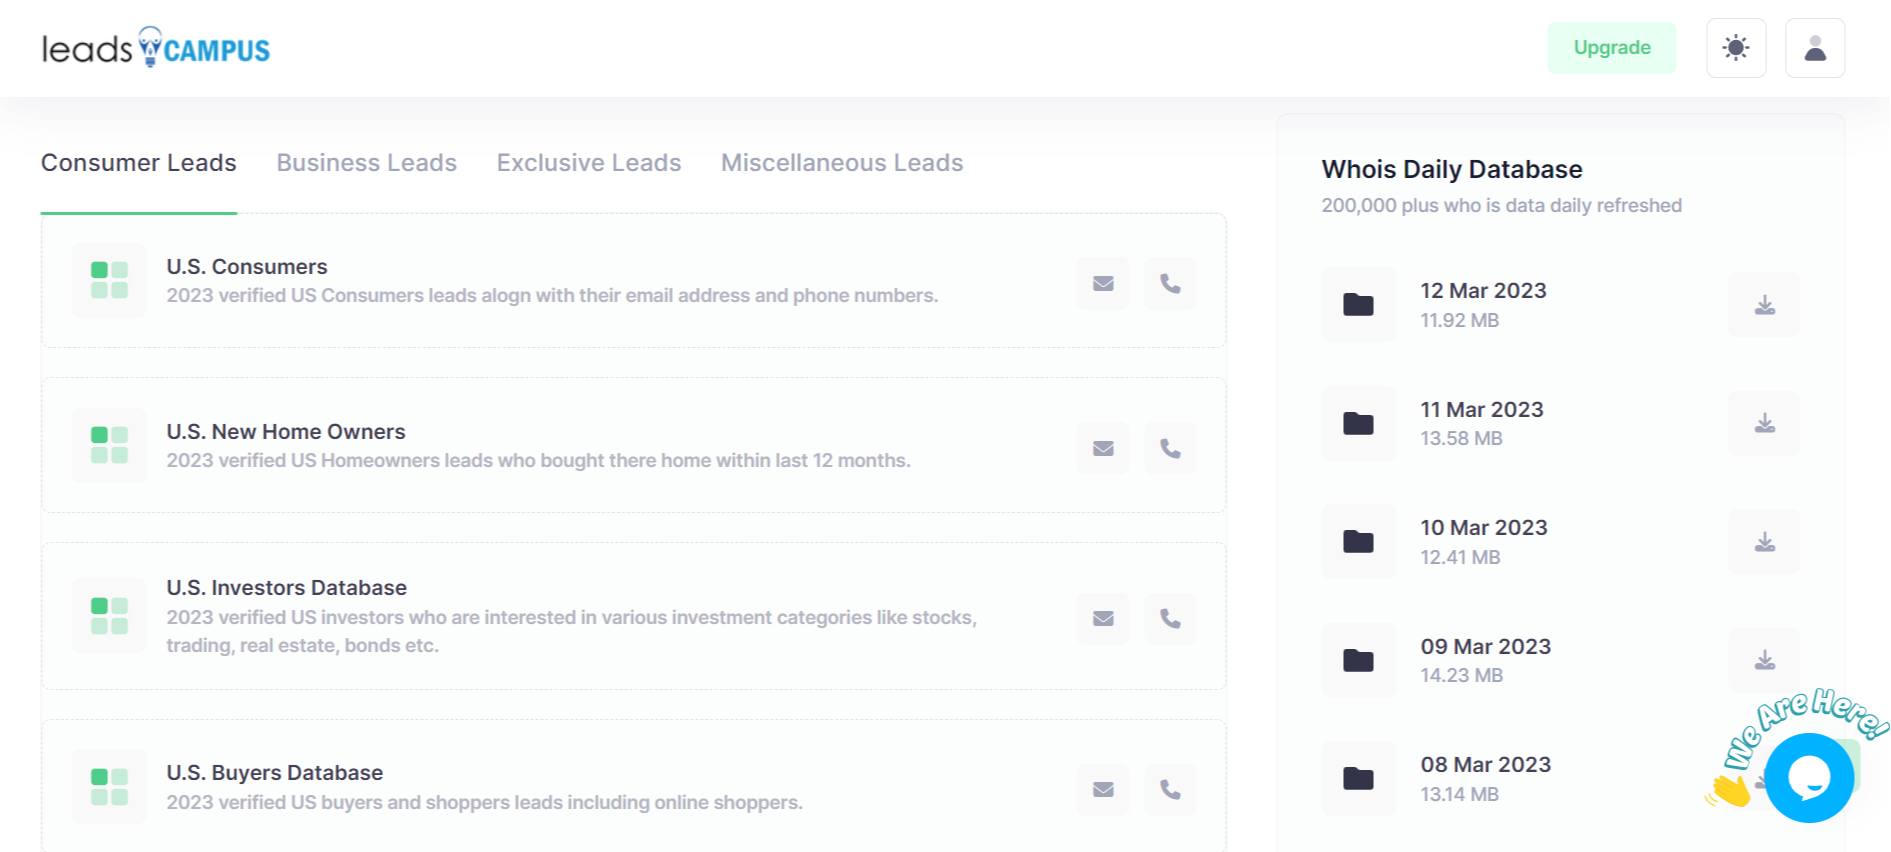 All features of Leadscampus Dashboard